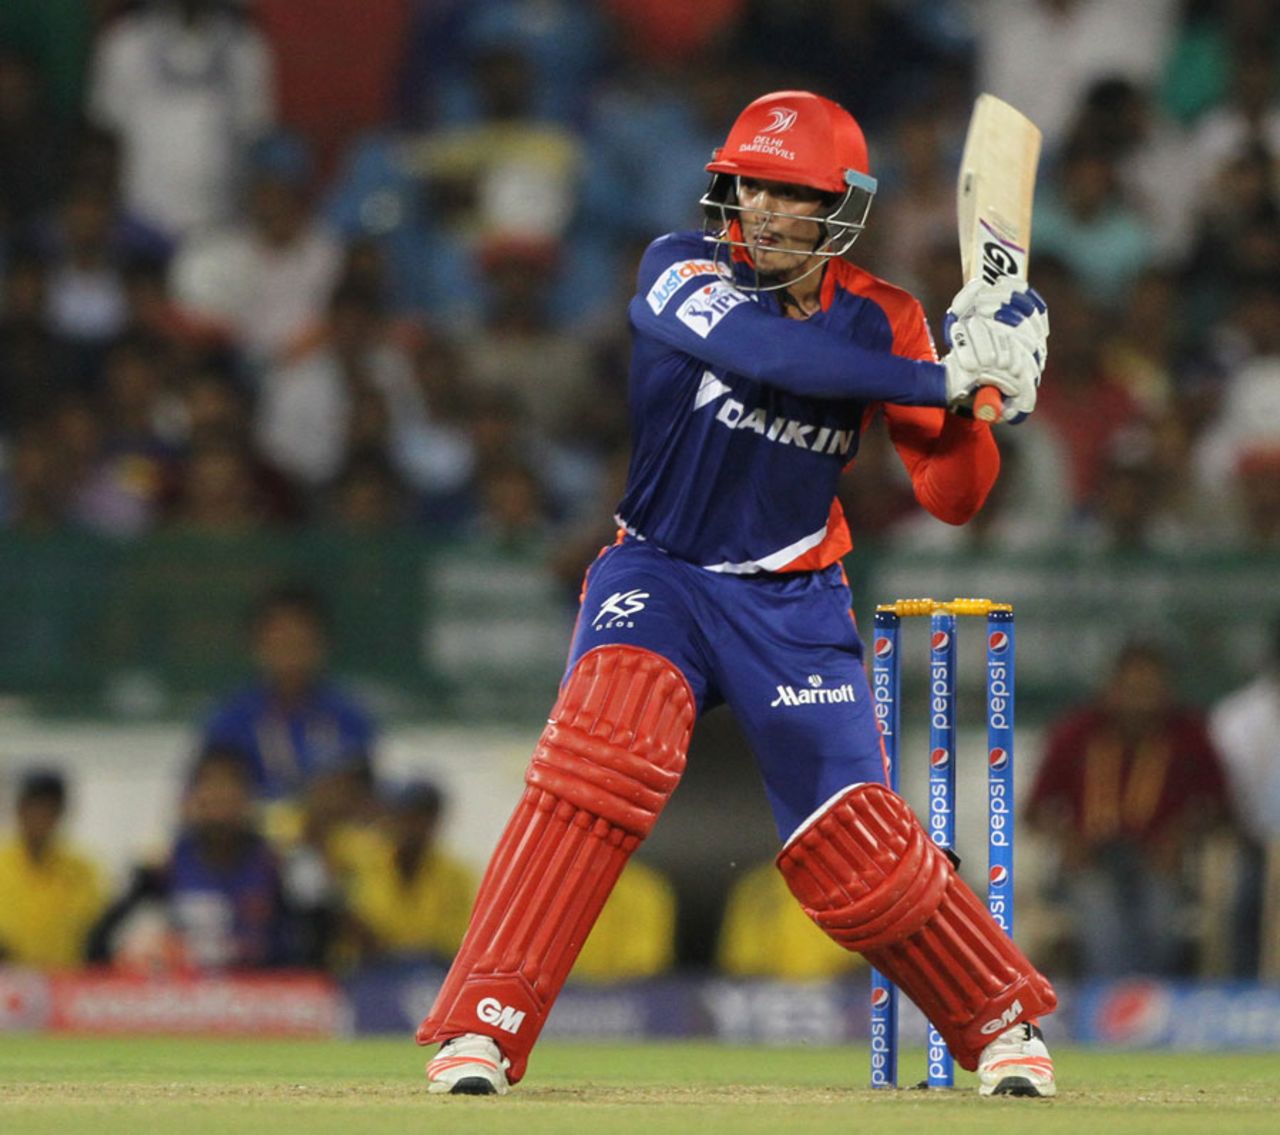 Quinton de Kock helped himself to a fifty in his first game of the season, Delhi Daredevils v Sunrisers Hyderabad, IPL 2015, Raipur, May 9, 2015